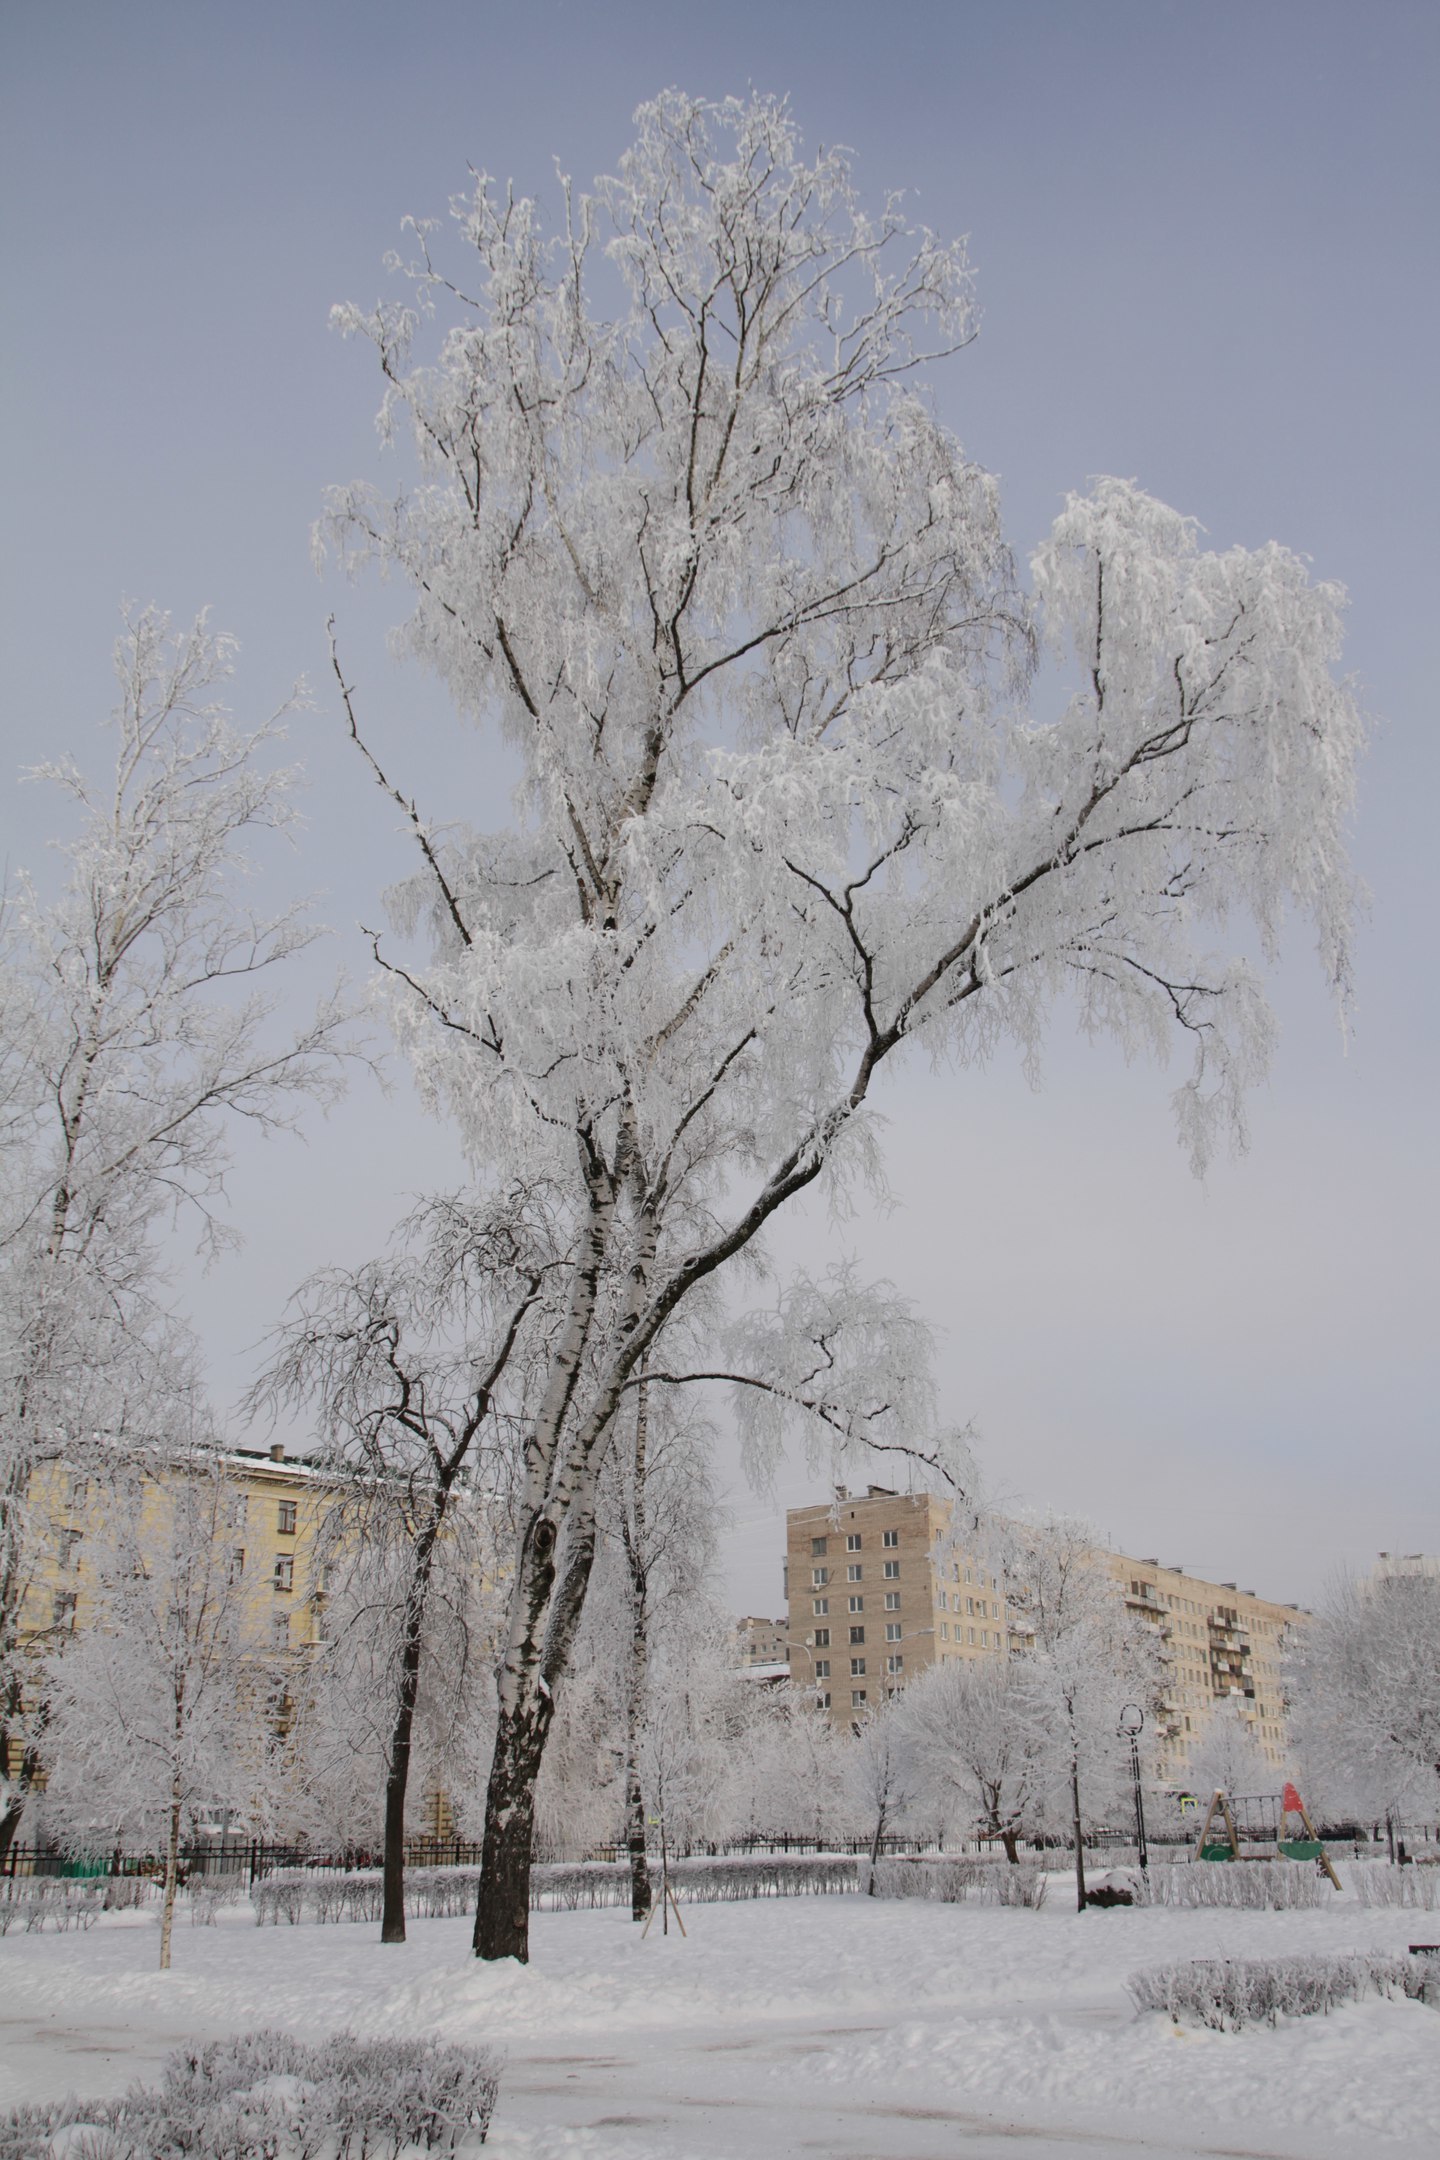 And in St. Petersburg the day before yesterday it was winter - My, Winter, Frost, Saint Petersburg, The photo, freezing, Canon 7d, Longpost